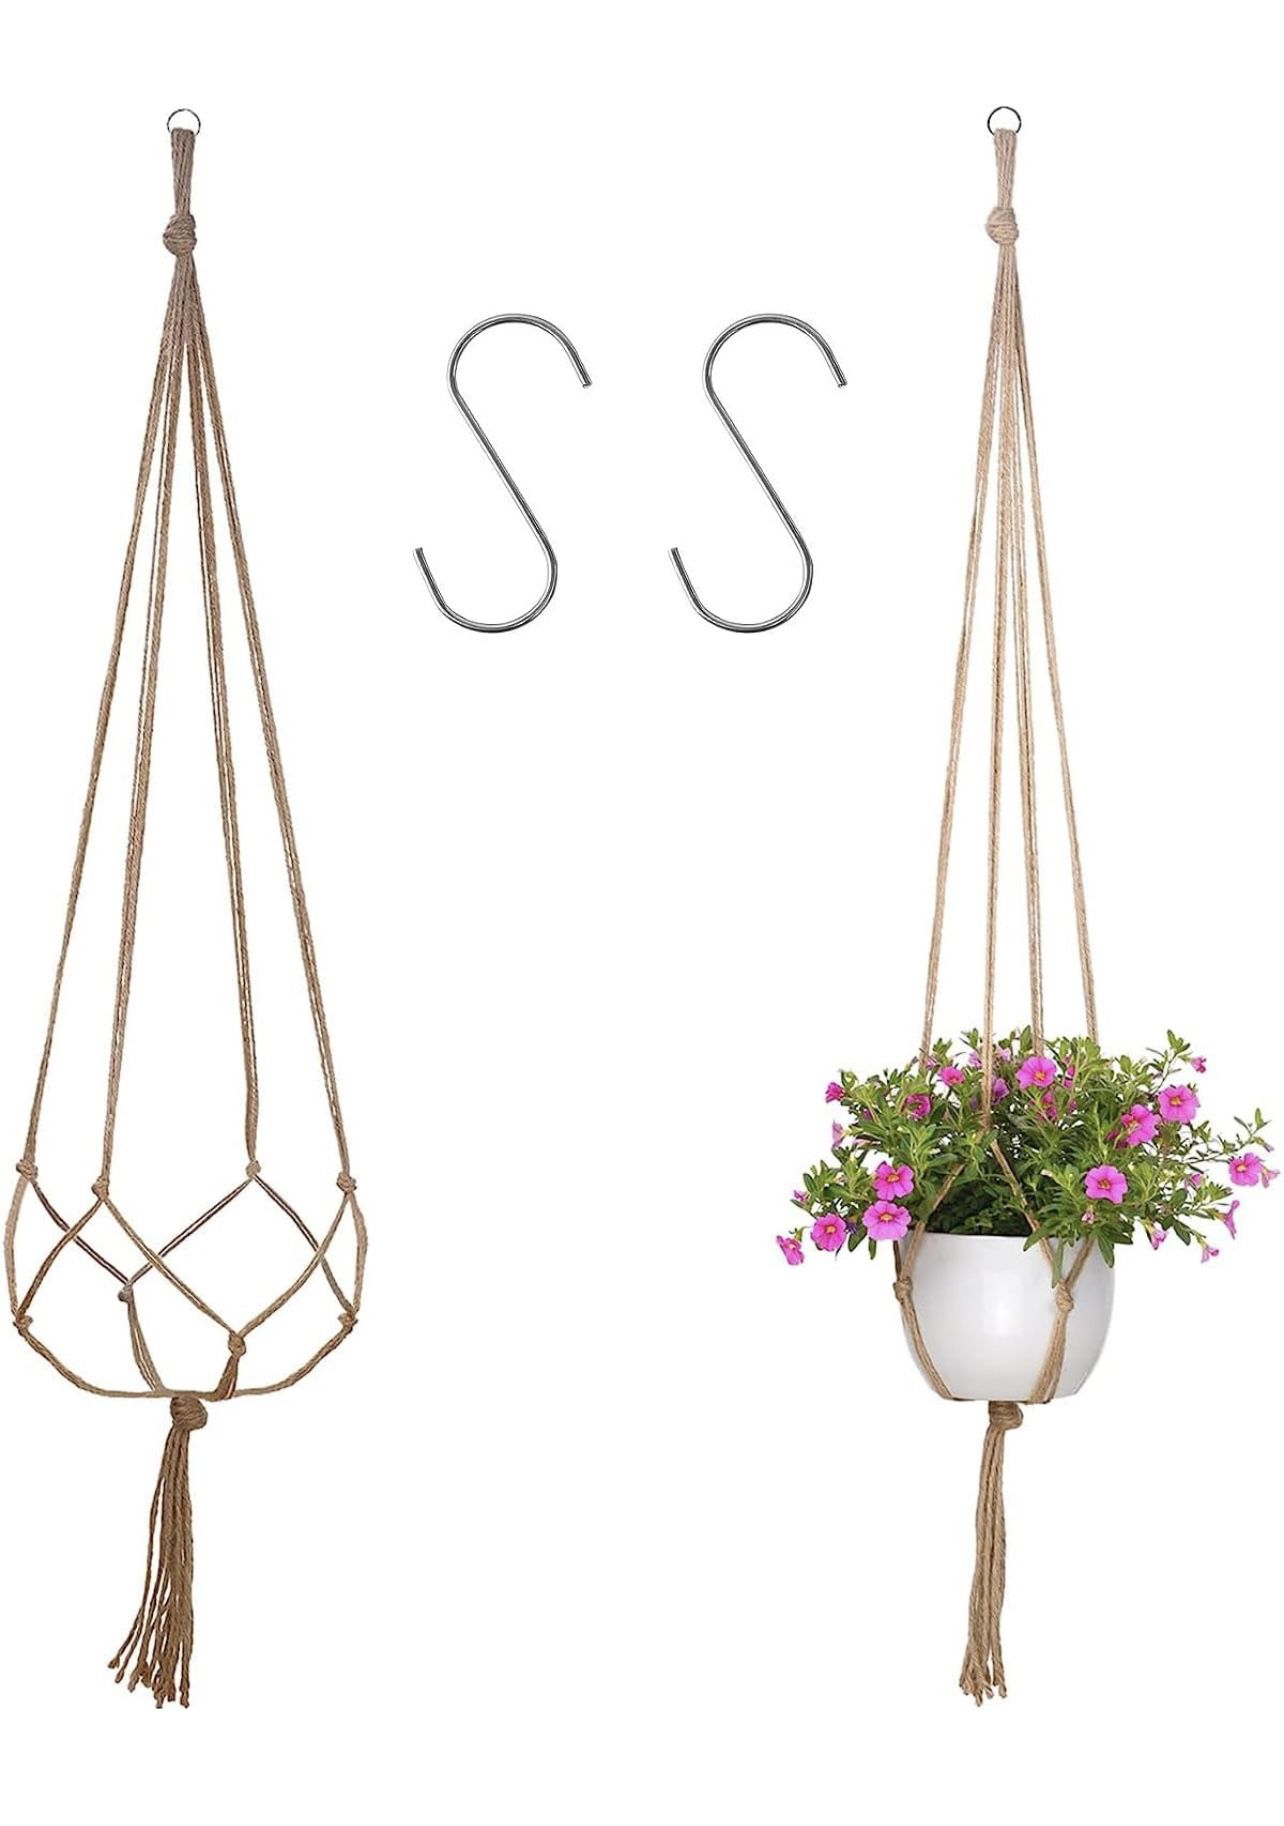 SGFJCHY 2 Pack Rope Plant Hanger 35 Inches Plant Hanger with Hooks Flower Pot Plant Holder for Indoor Outdoor Decorations